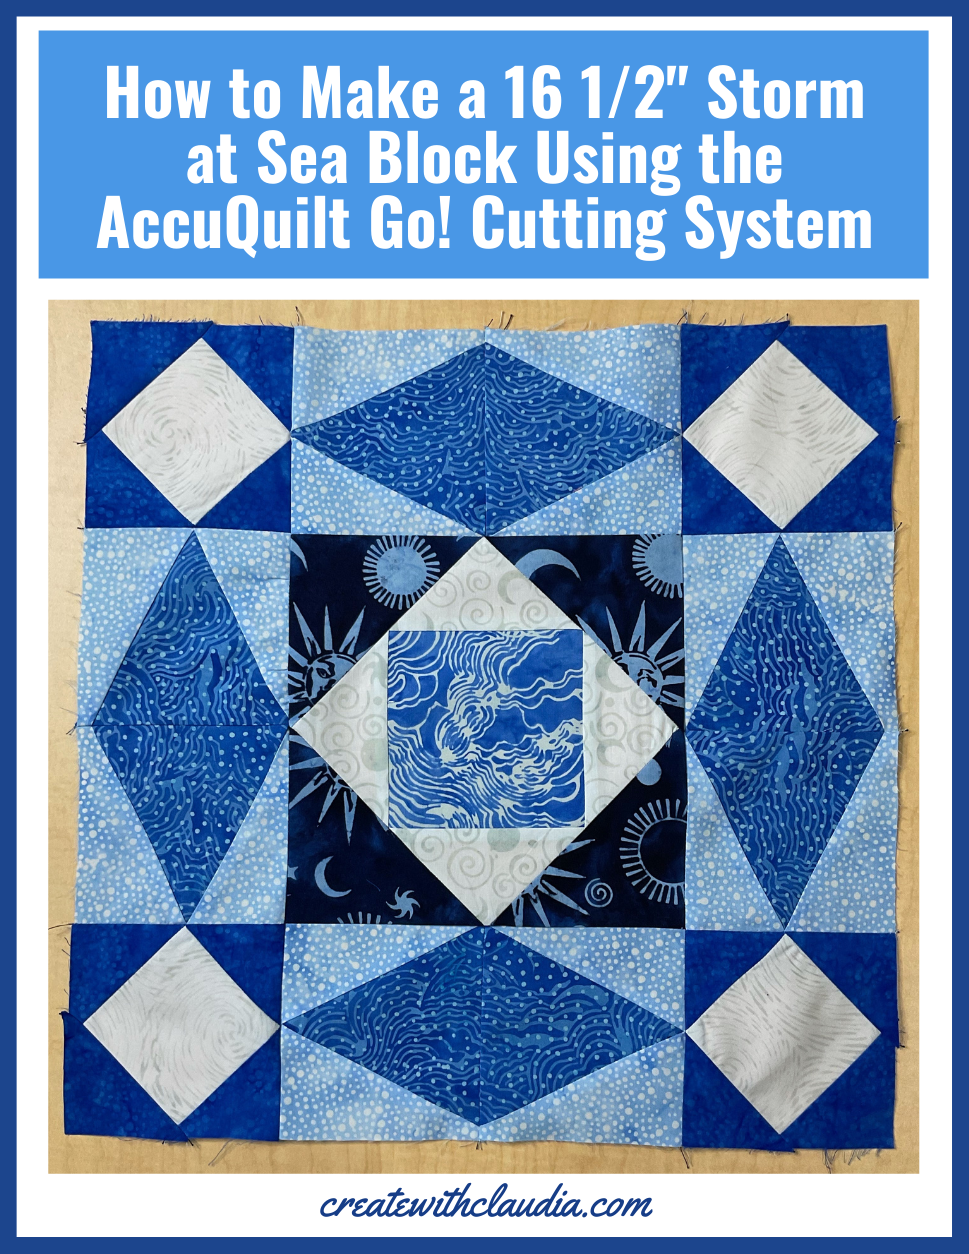 AccuQuilt Tips & Tricks: How to store your AccuQuilt GO! Dies